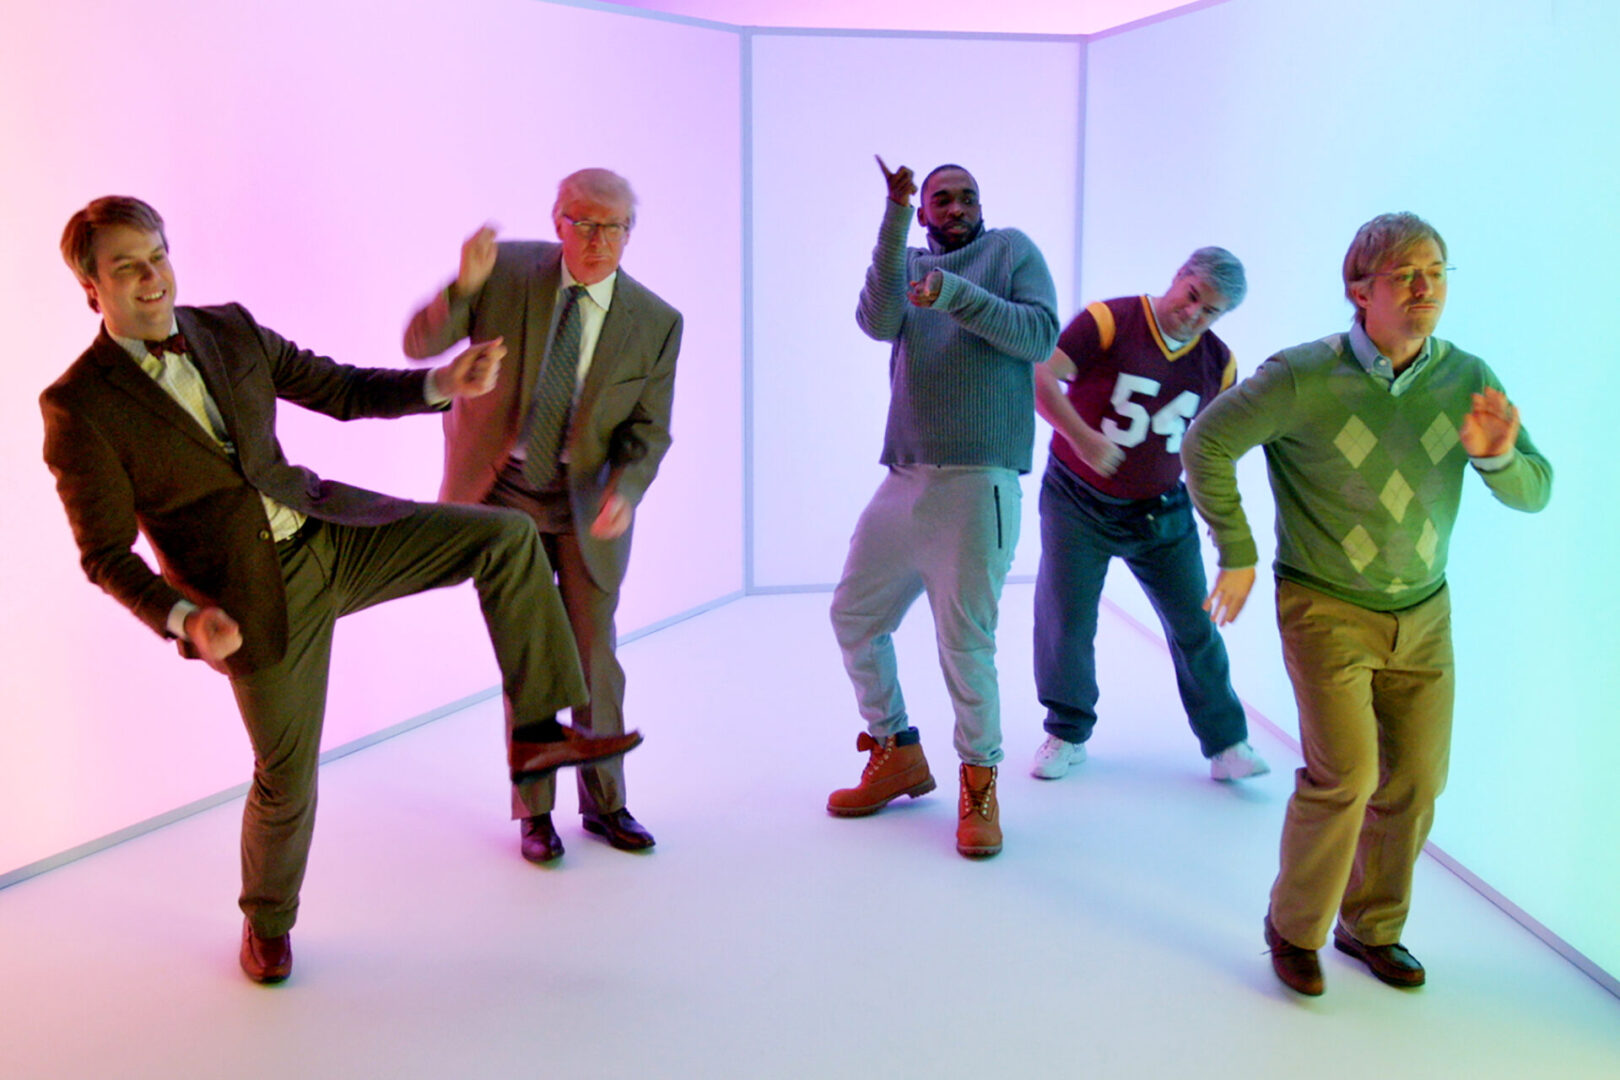 SATURDAY NIGHT LIVE -- "Donald Trump" Episode 1687 -- Pictured: (l-r) Taran Killam, Donald Trump, Jay Pharoah as Drake, Bobby Moynihan, and Beck Bennett during the "Hotline Bling Parody" sketch on November 7, 2015 -- (Photo by: Dana Edelson/NBCU Photo Bank/NBCUniversal via Getty Images via Getty Images)